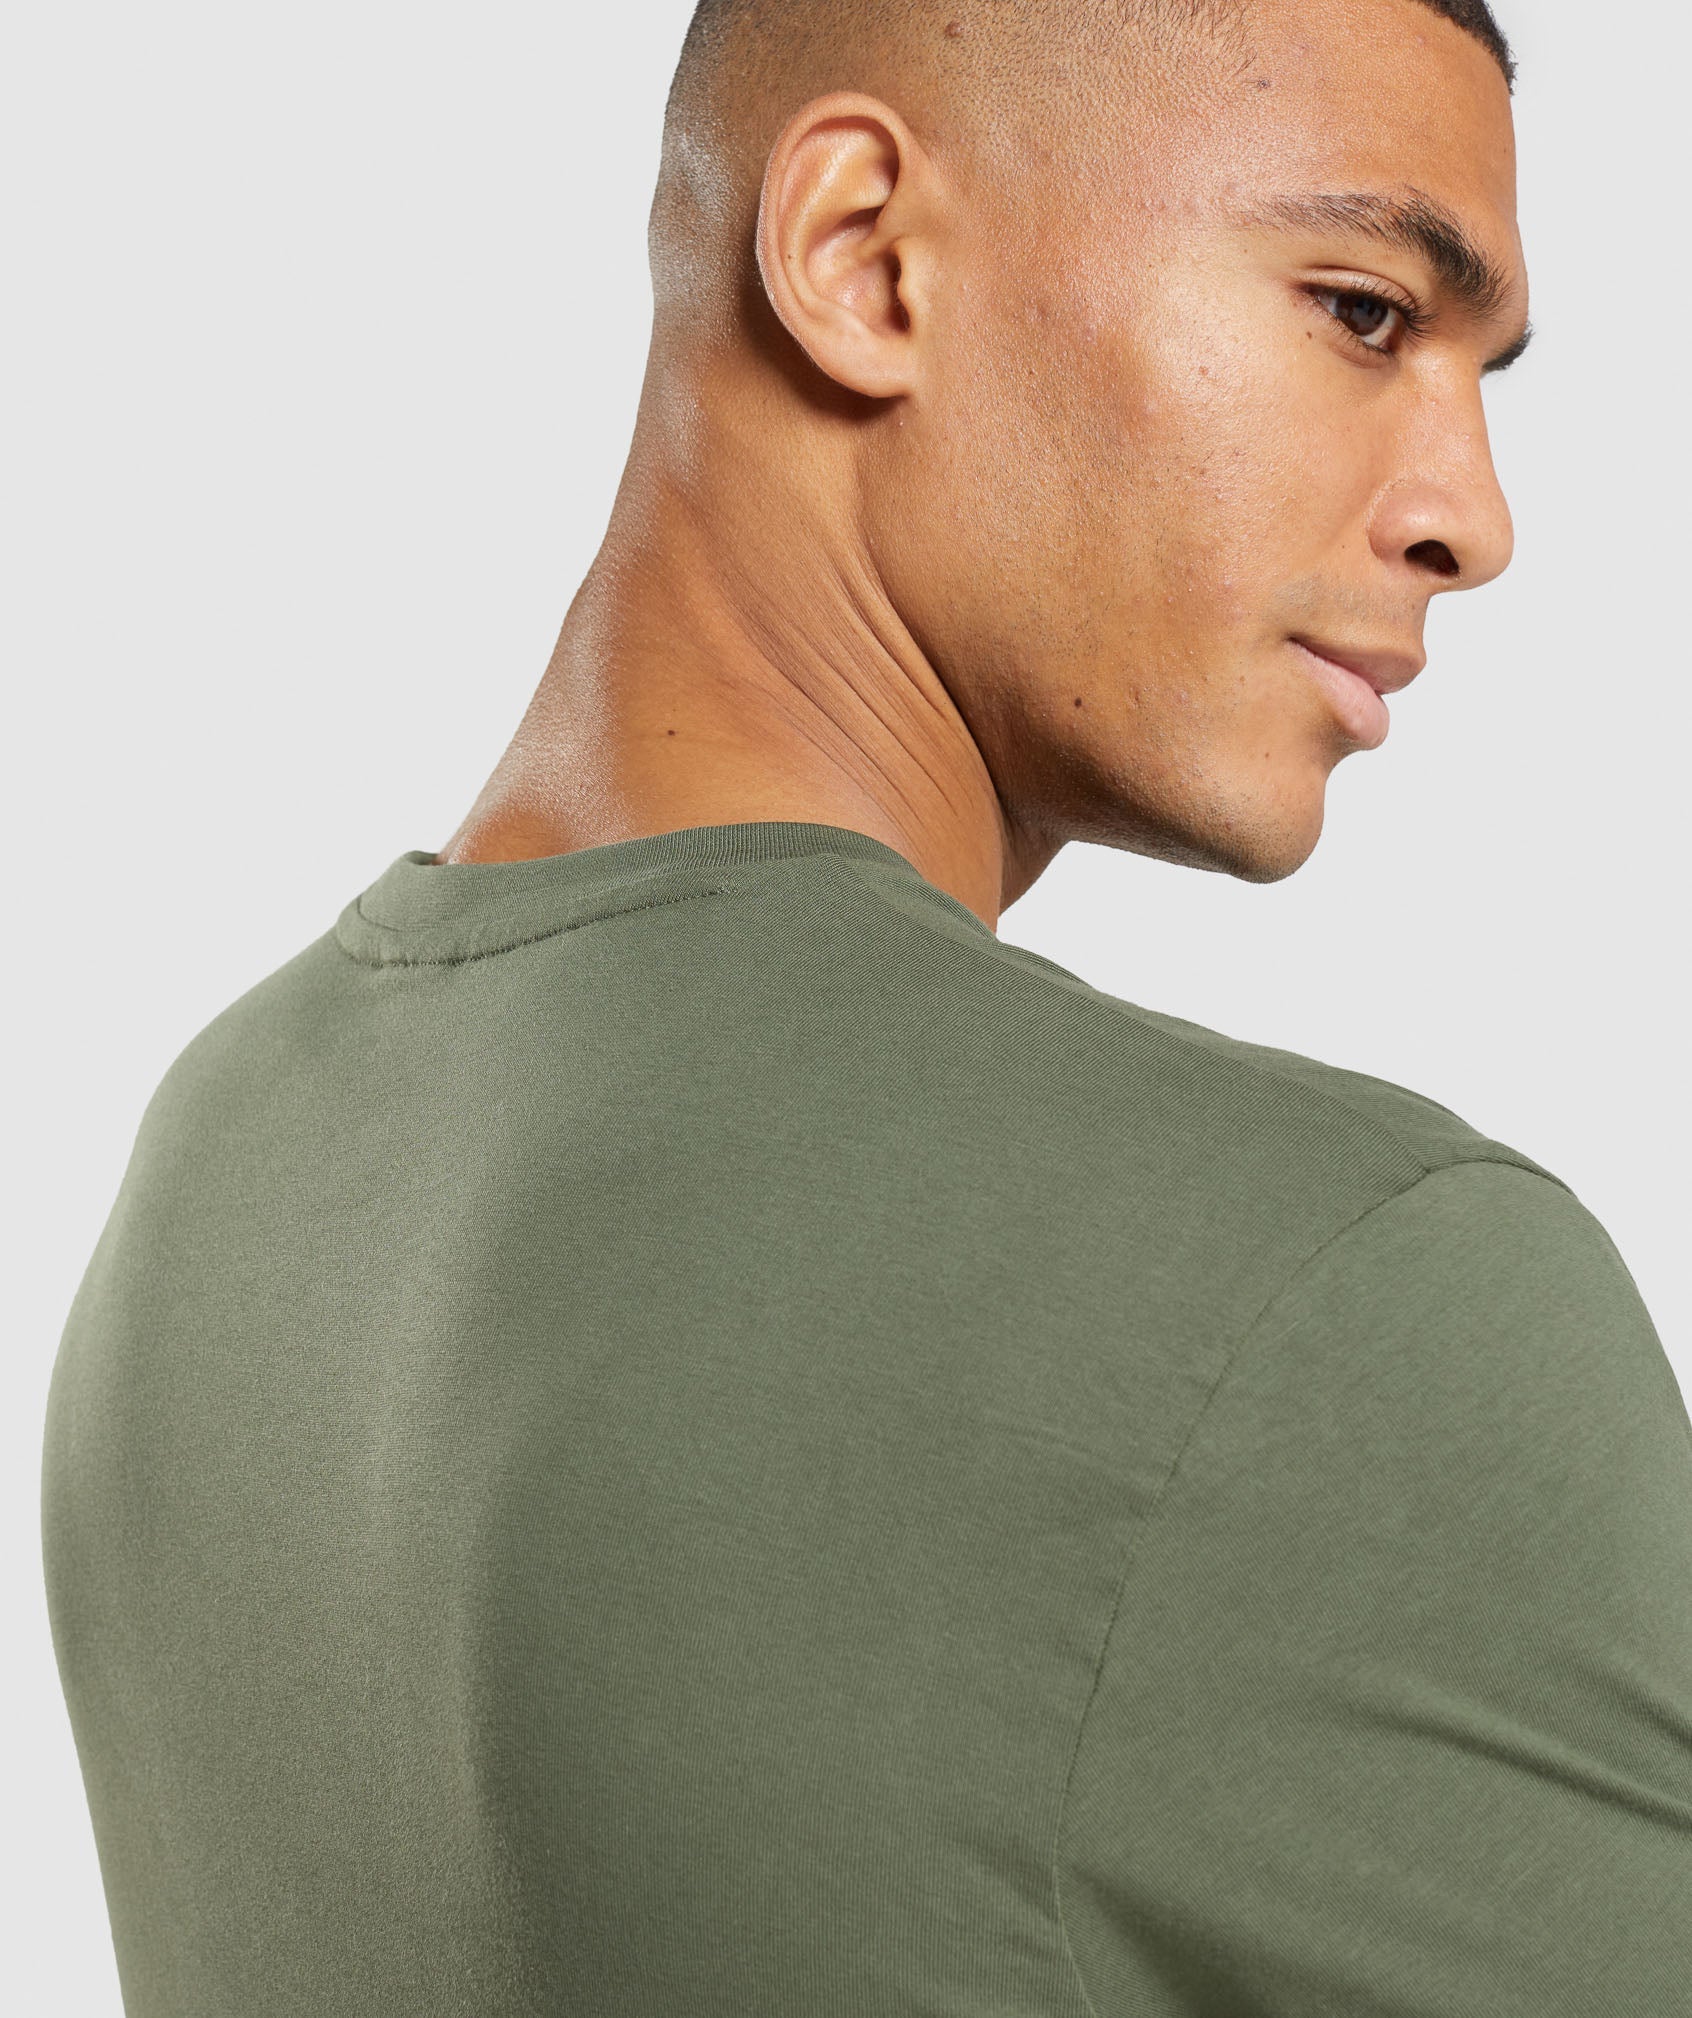 Crest T-Shirt in Core Olive - view 6